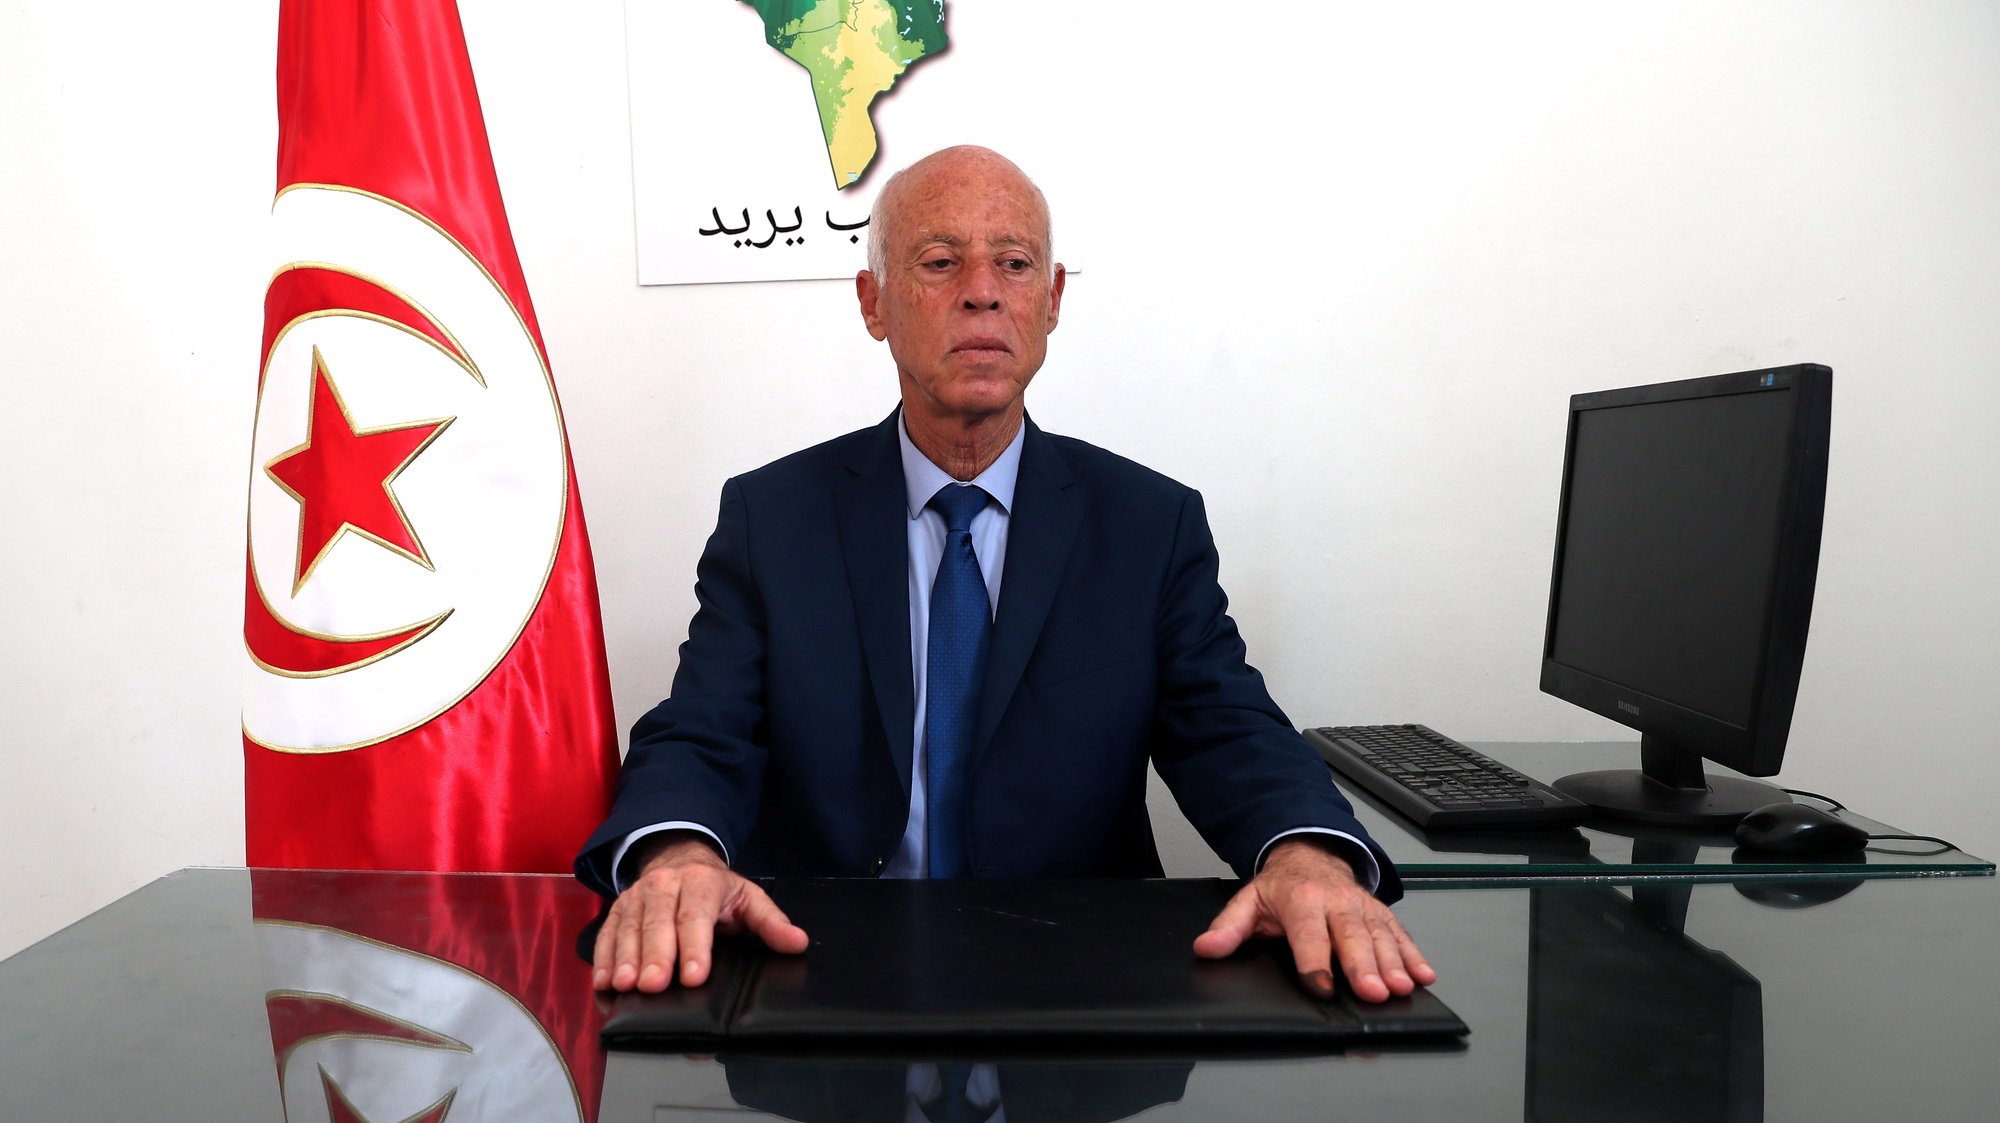 epa07846950 Tunisian presidential candidate Kais Saied poses for a photo at his campaign headquarters in Tunis, Tunisia, 16 September 2019. According to reports, preliminary results showed presidential candidates Kais Said, a 61-year-old law professor, and imprisoned businessman Nabil Karoui are leading the first round of voting and expected to face off in the second round in October.  EPA/MOHAMED MESSARA